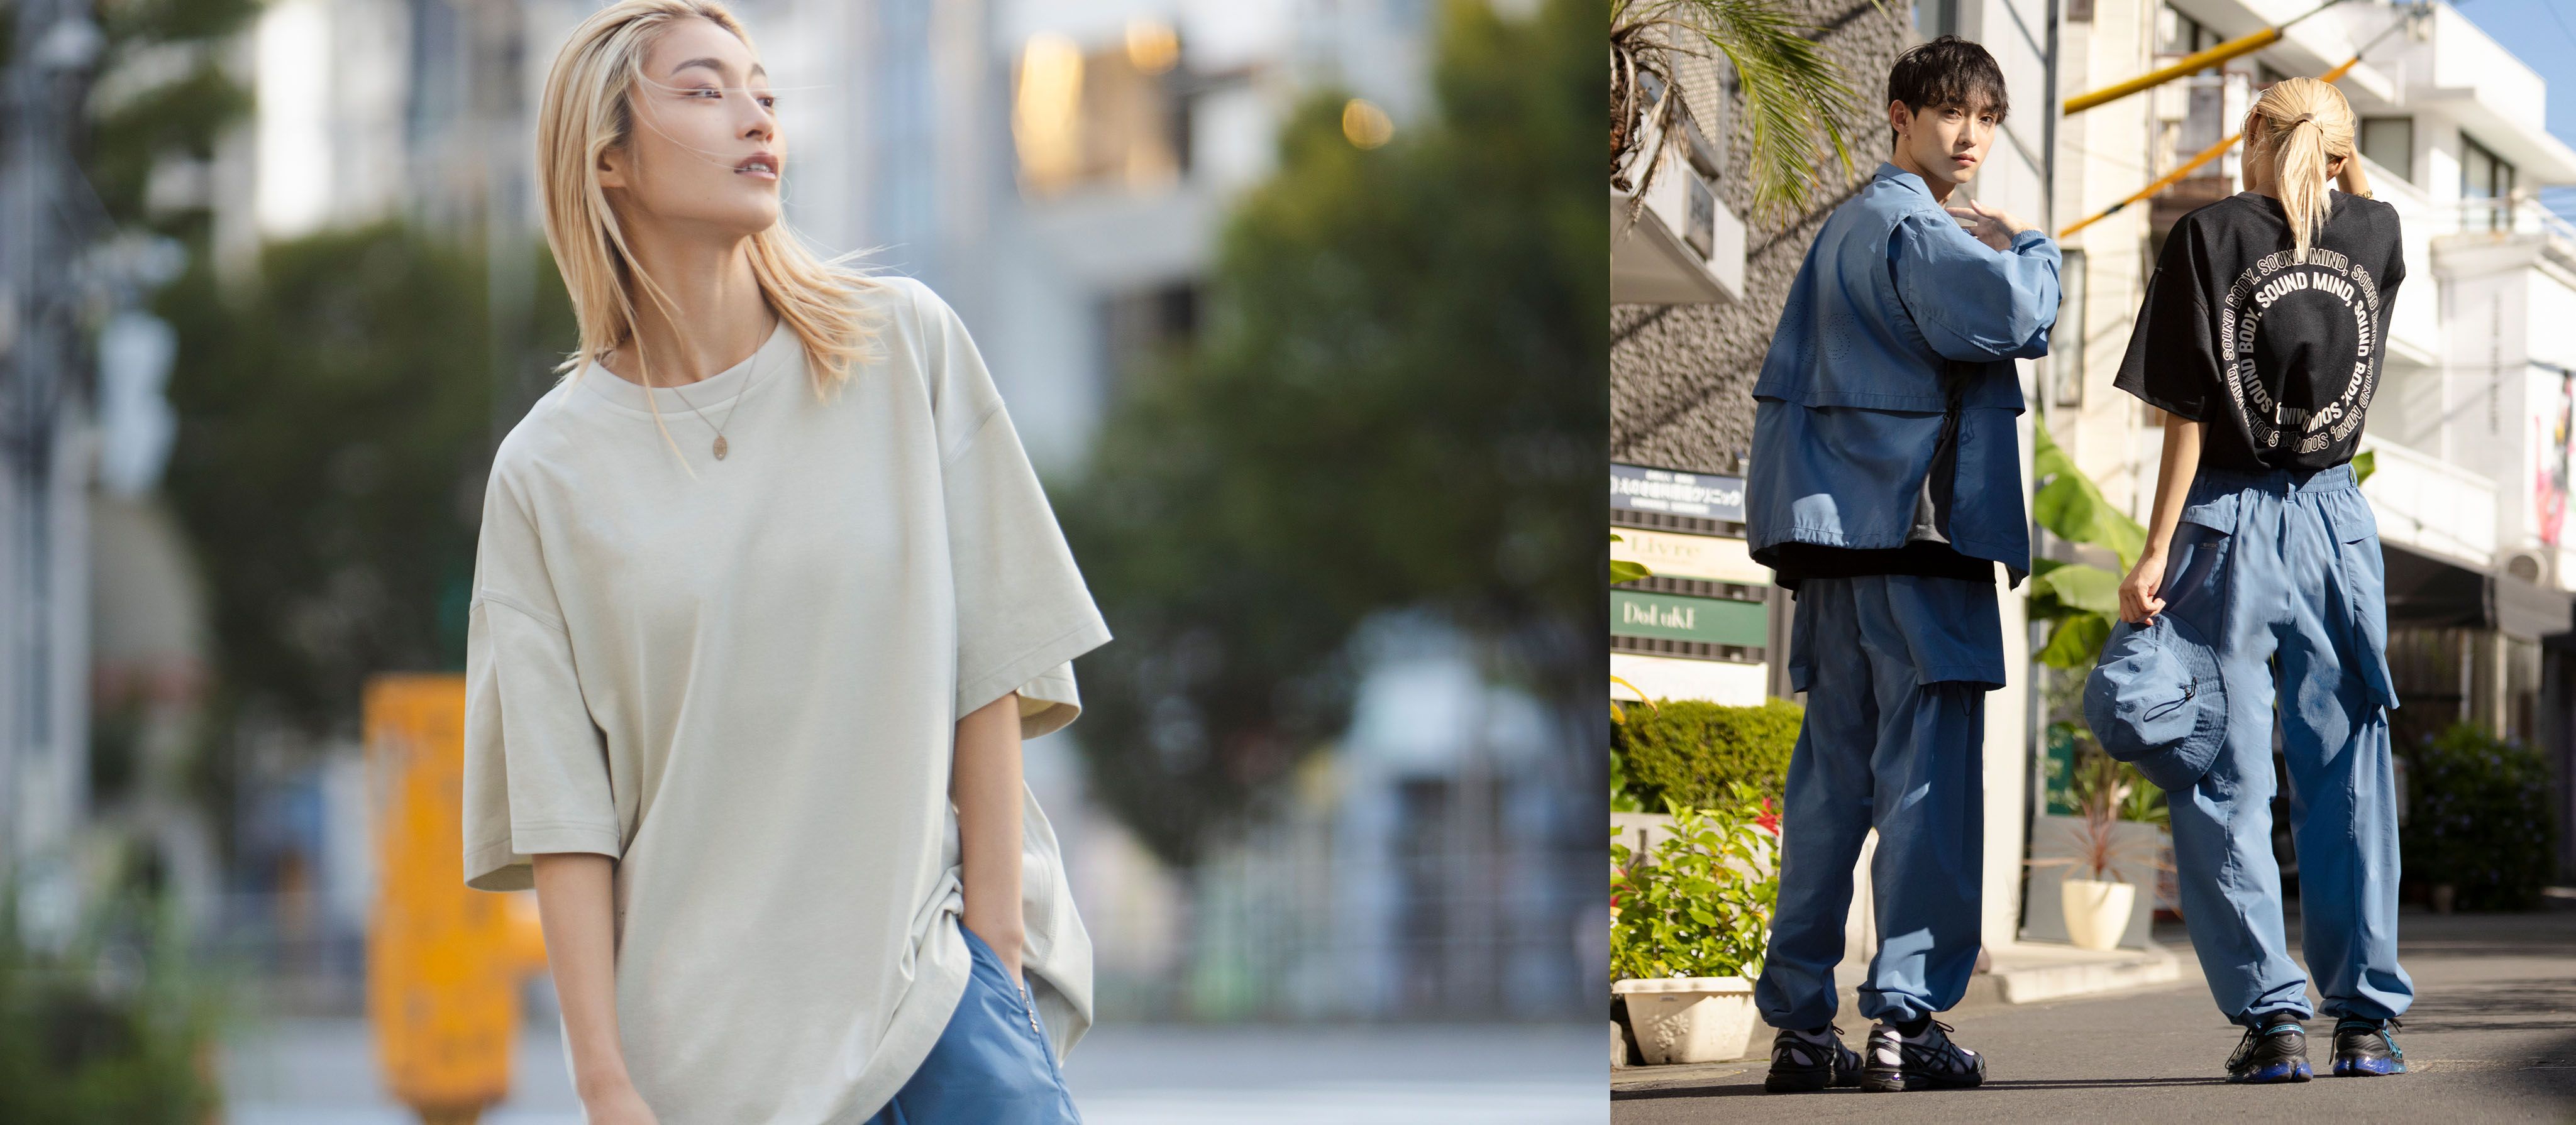 On the left image: a female model wears the new beige SPS Apparel crewneck and blue pants, on the right image: a male and female model stand in the street wearing the blue SPS Apparel jacket and pants, as well as the SMSB graphic tee